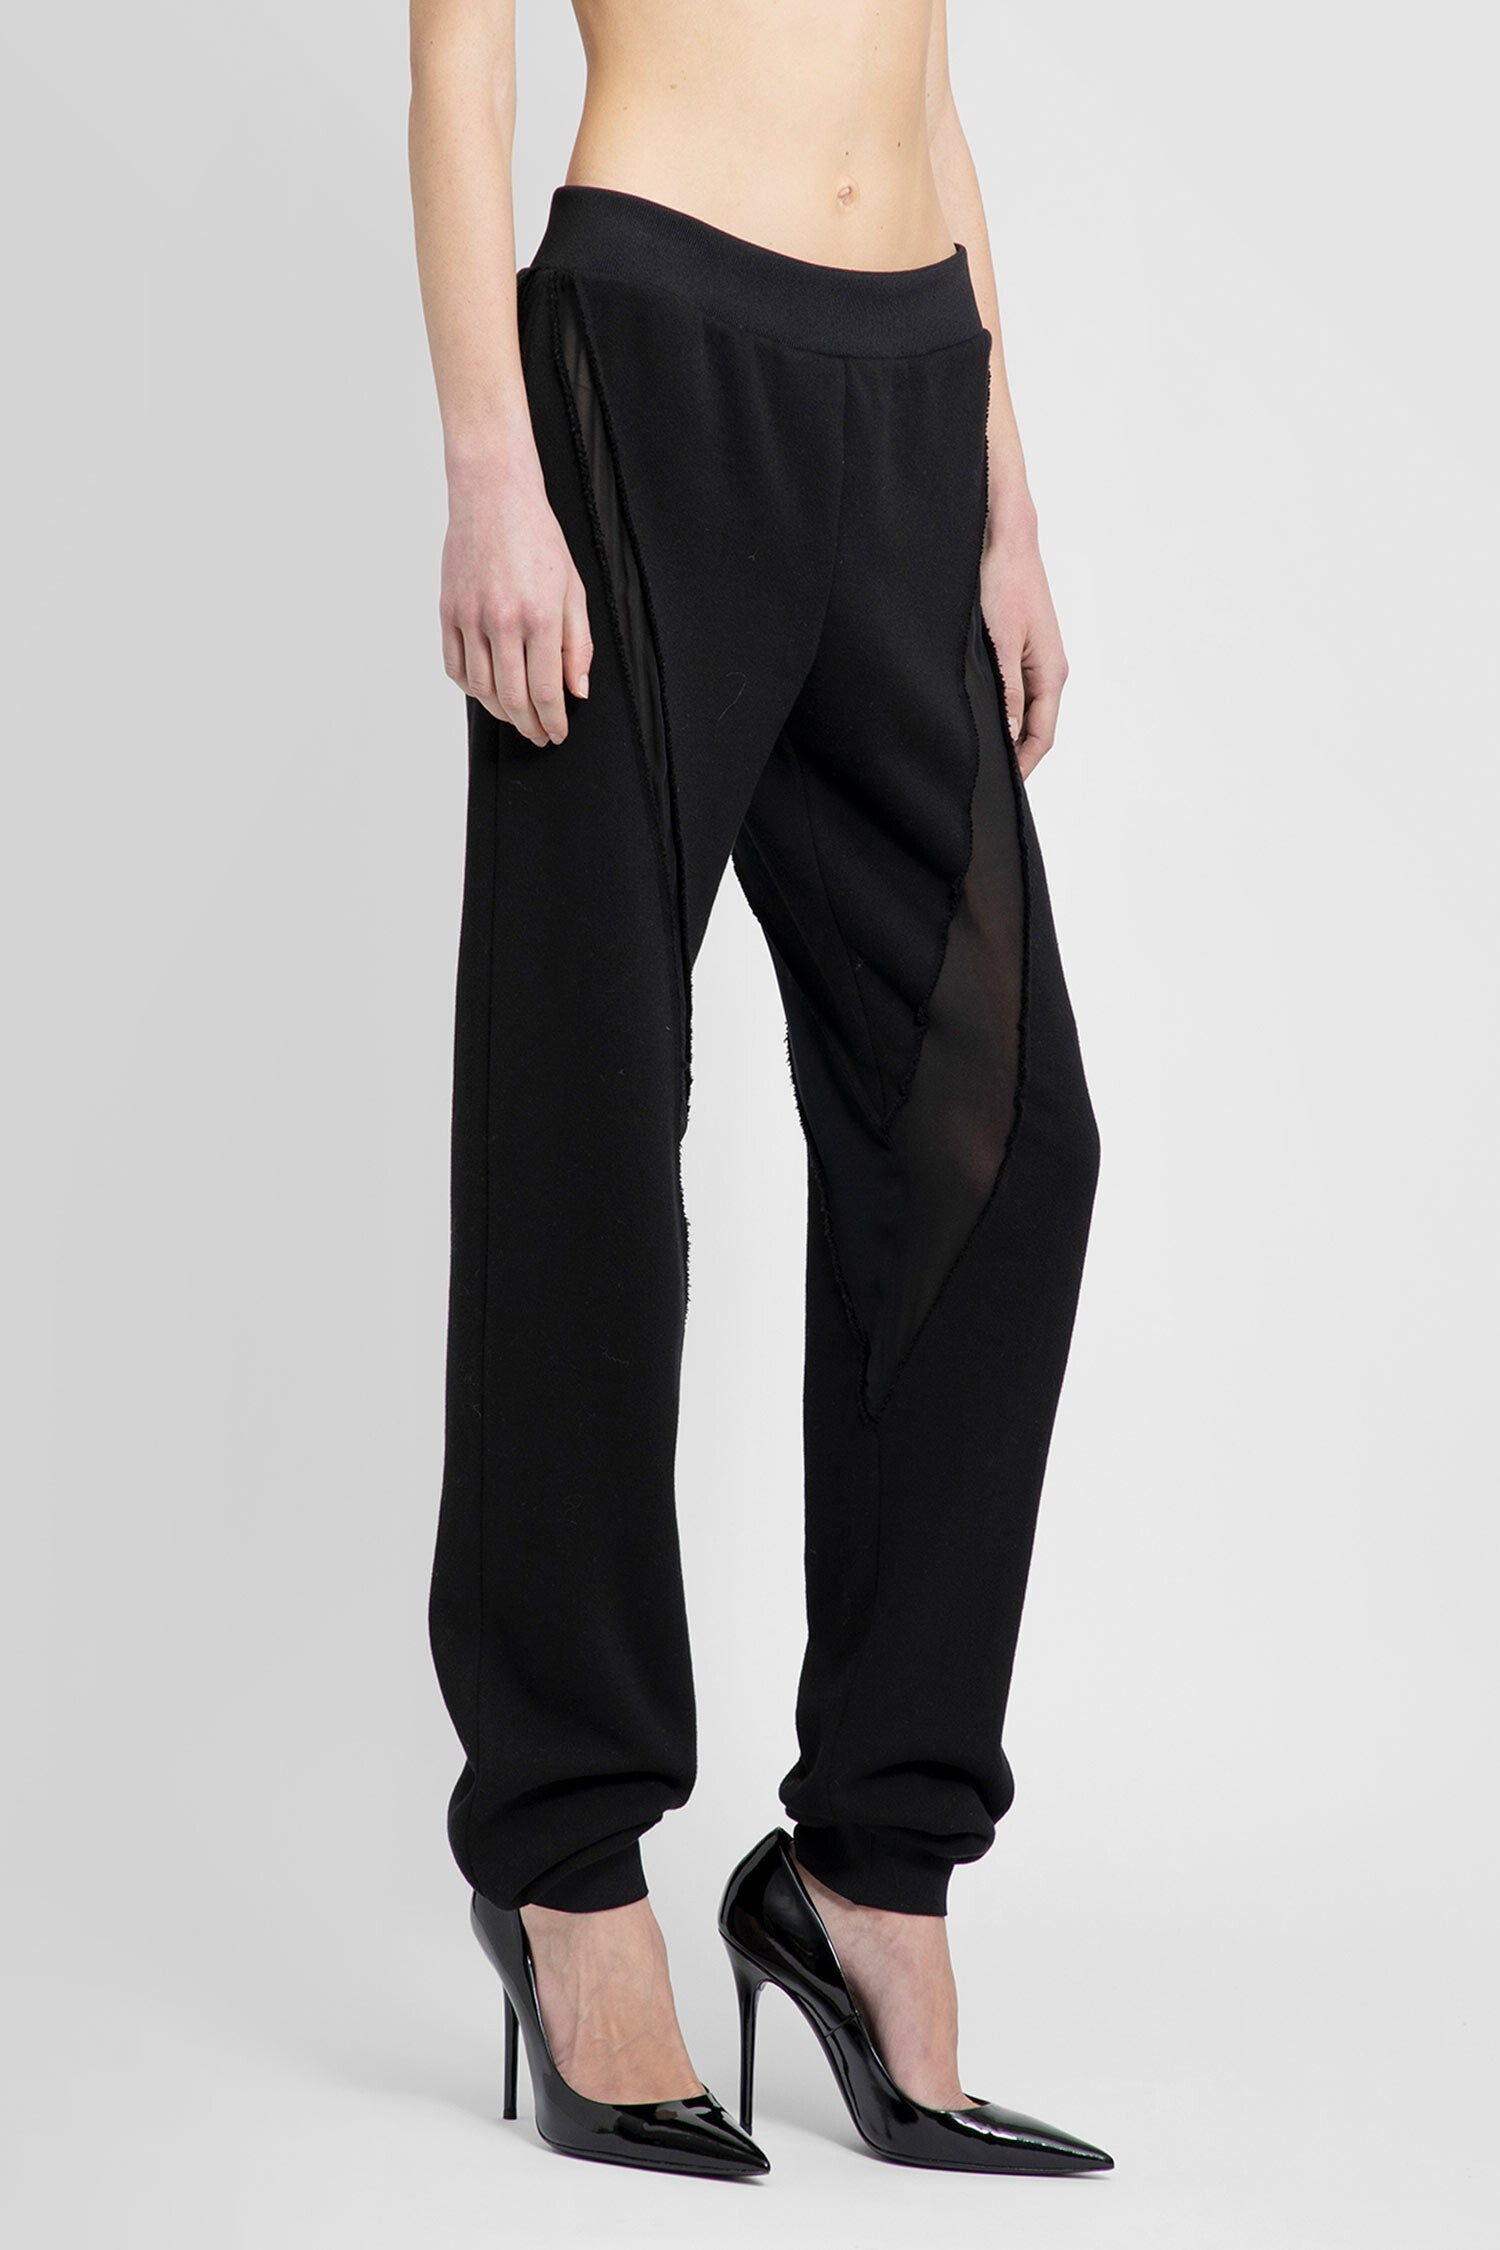 TOM FORD WOMAN BLACK TROUSERS - 3